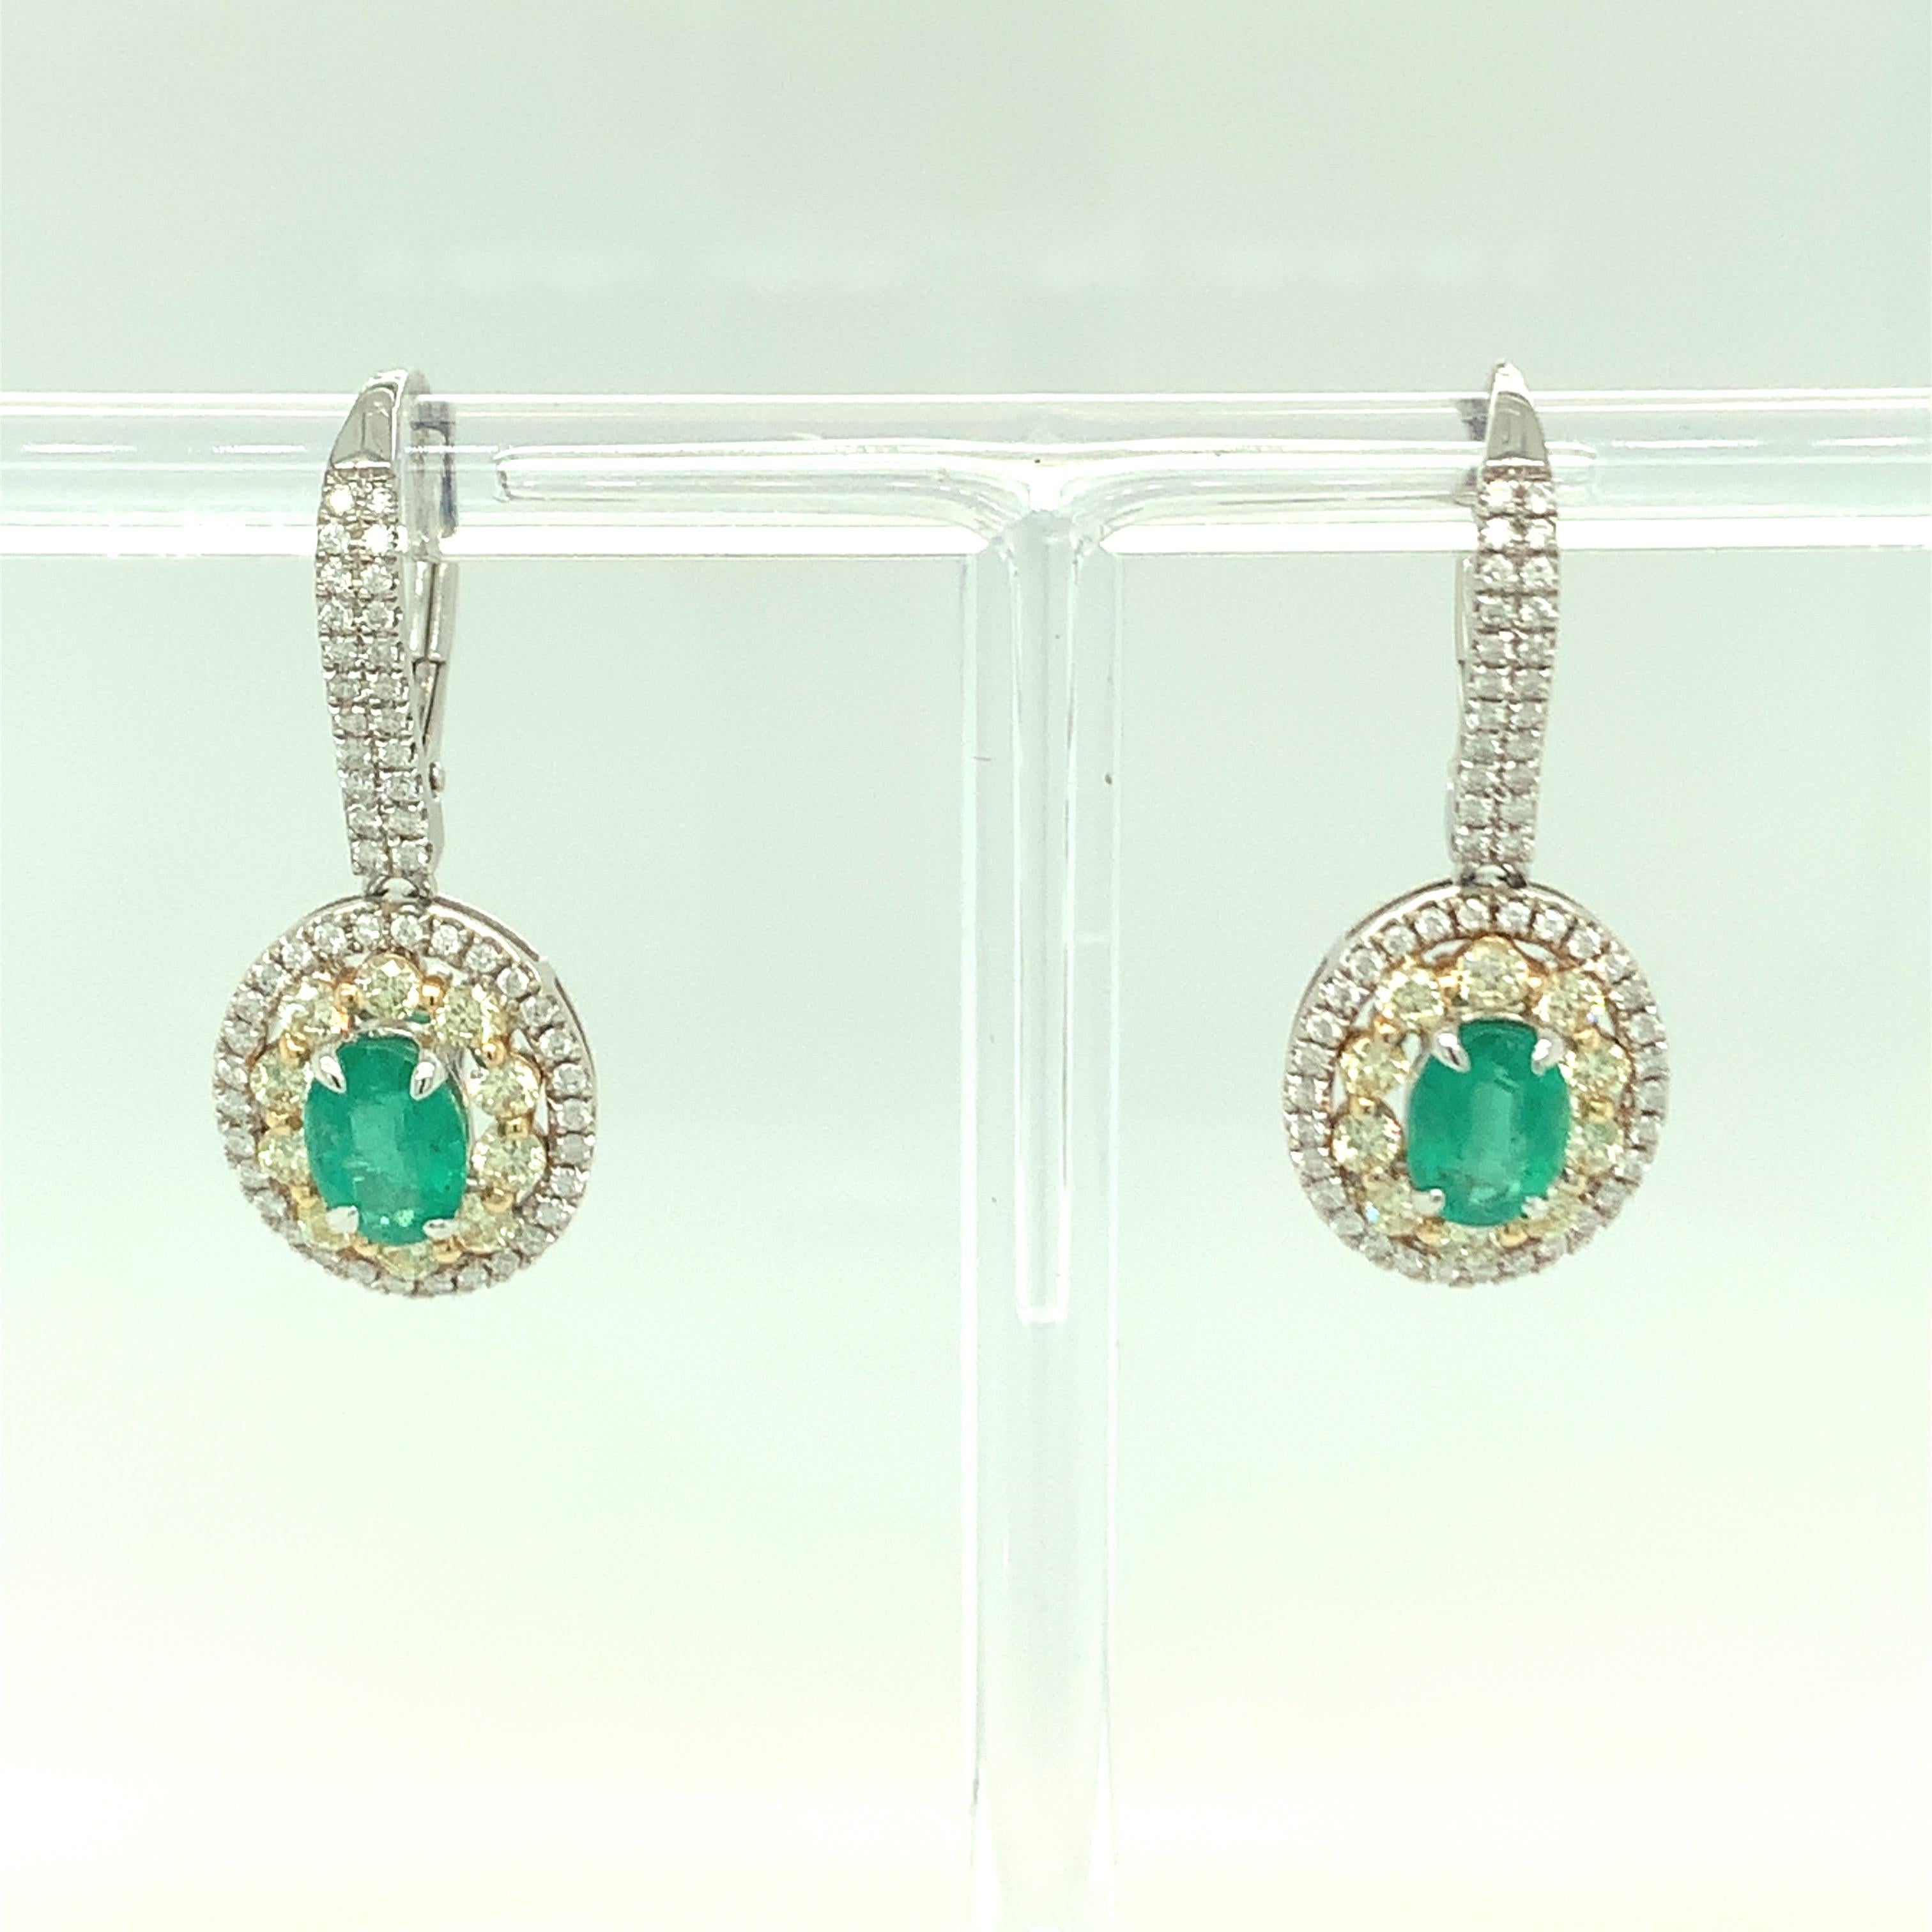 Artisan 1.5 Carat Emerald Earrings with Yellow and White Diamond Set in Two Tone Gold